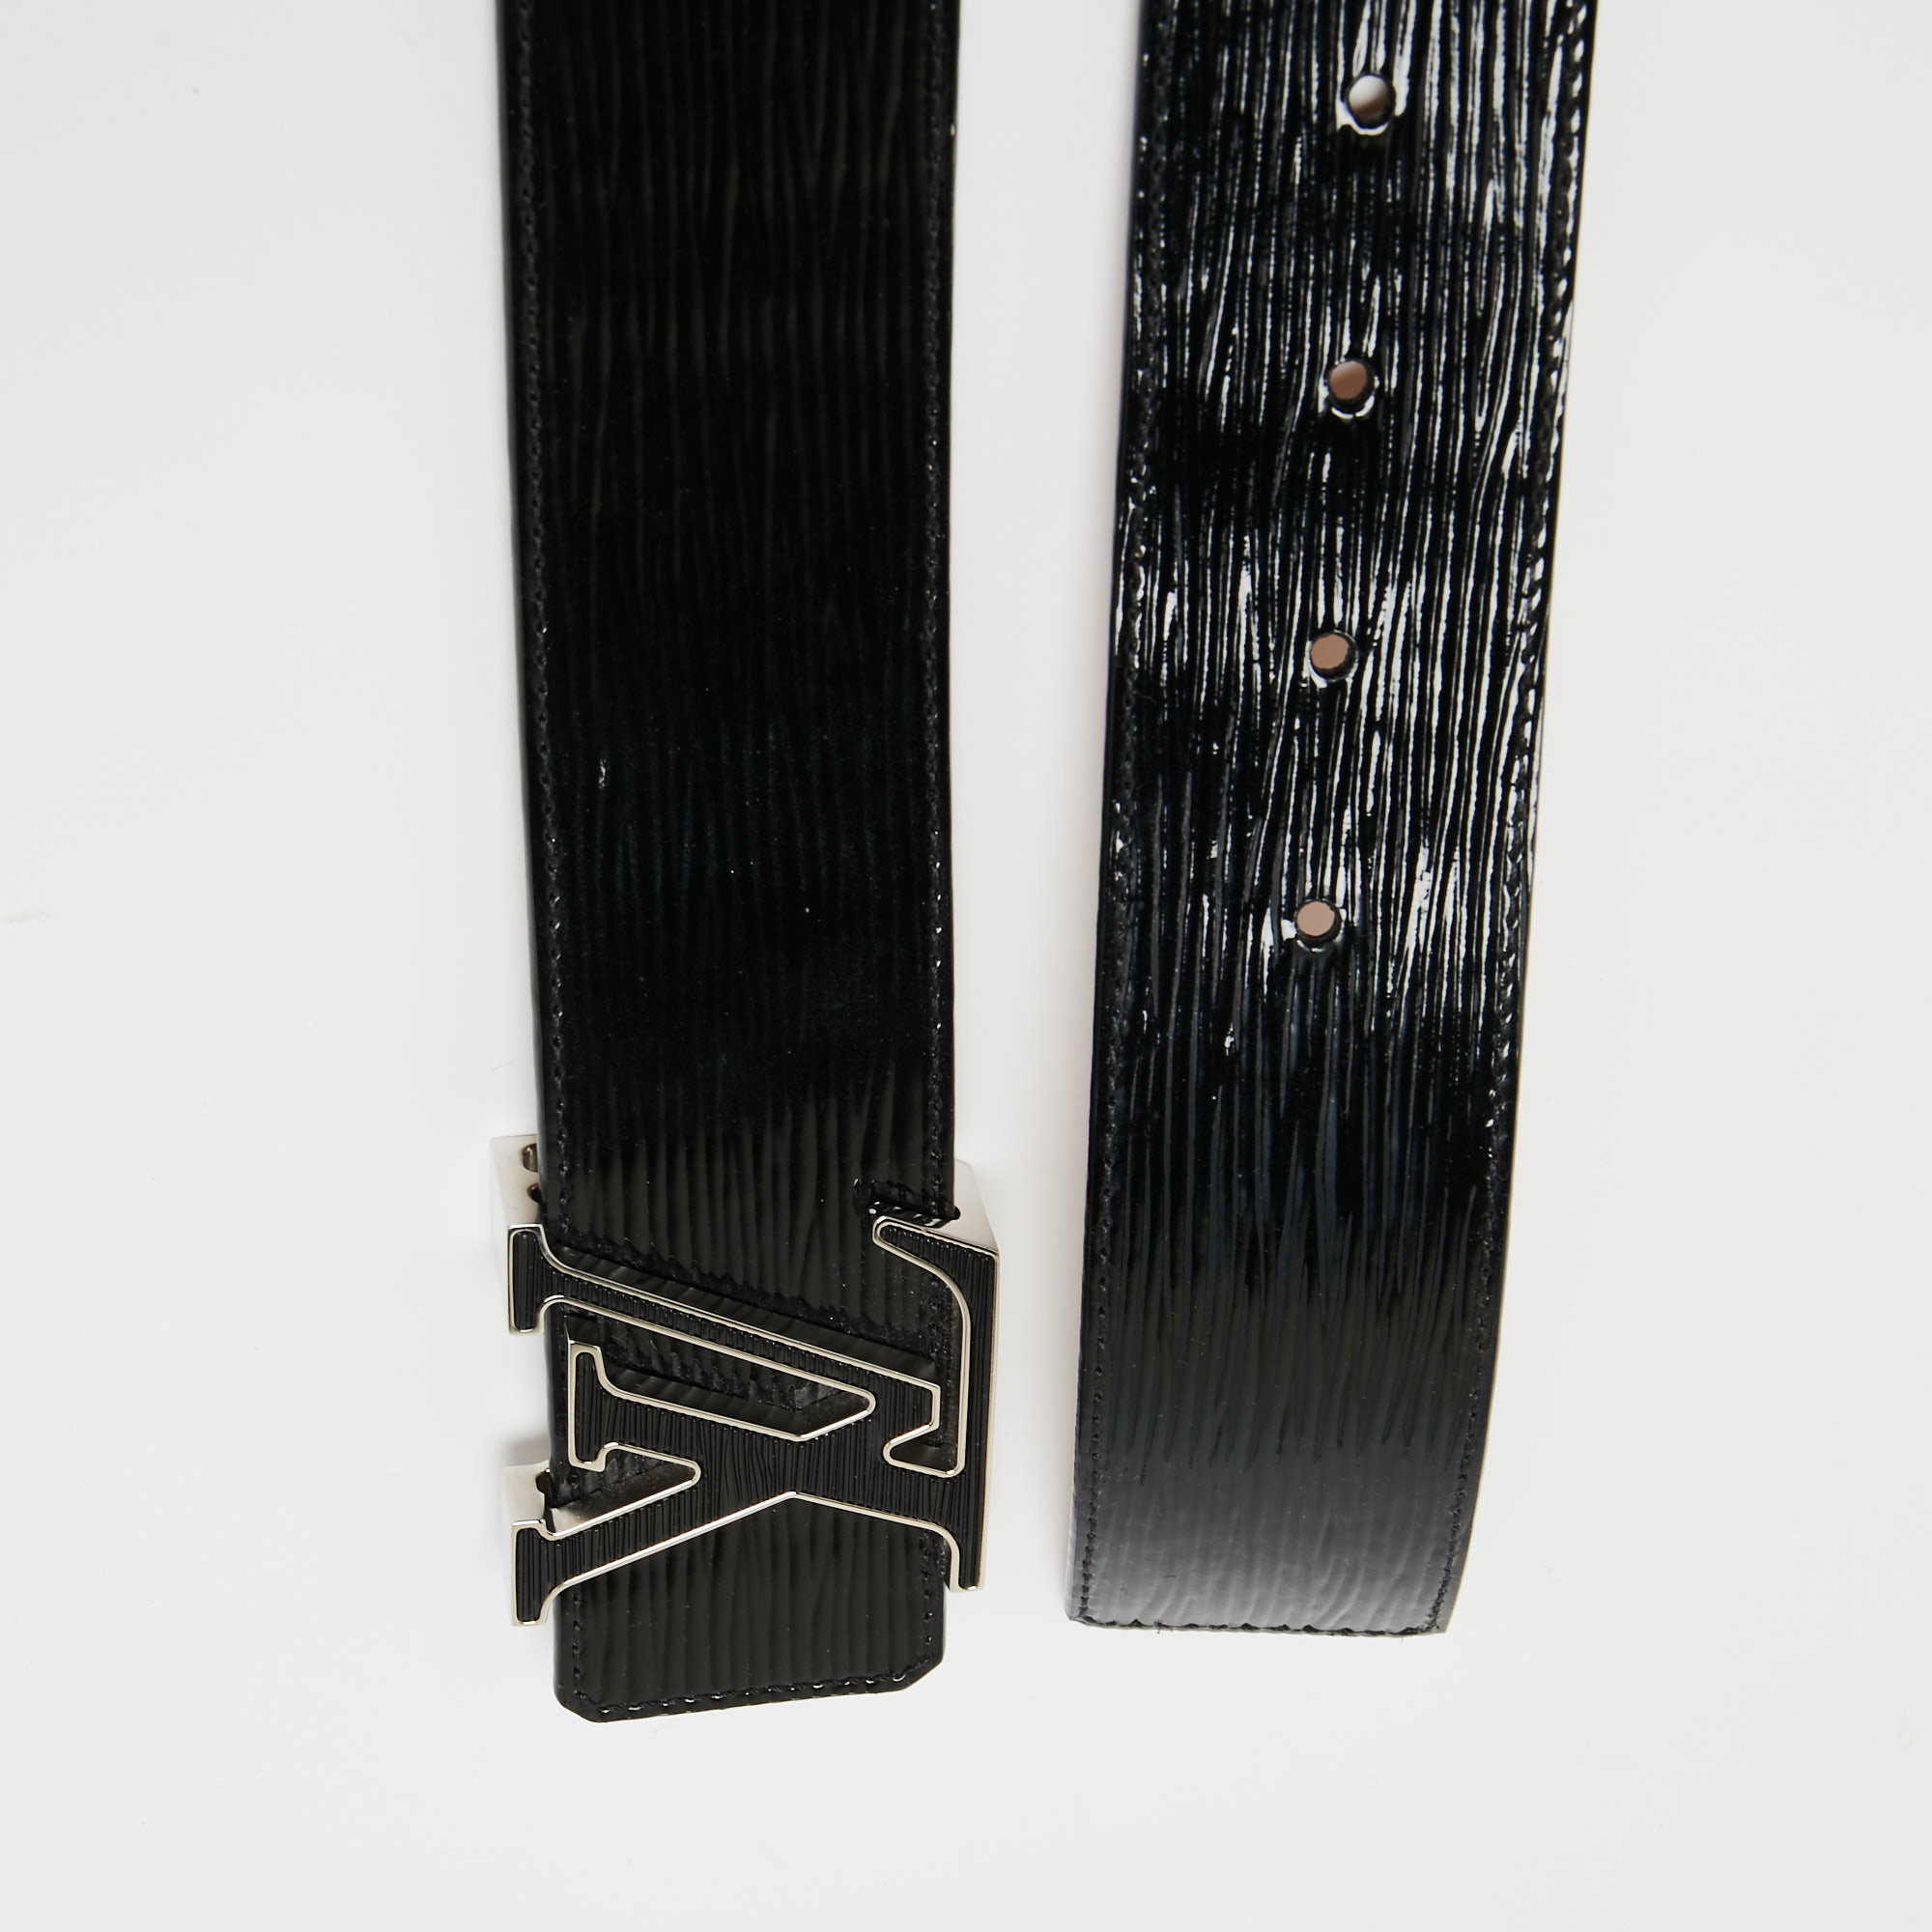 Louis Vuitton Belt LV Initiales Epi 1.25 Width Black in Leather with  Silver-tone - US